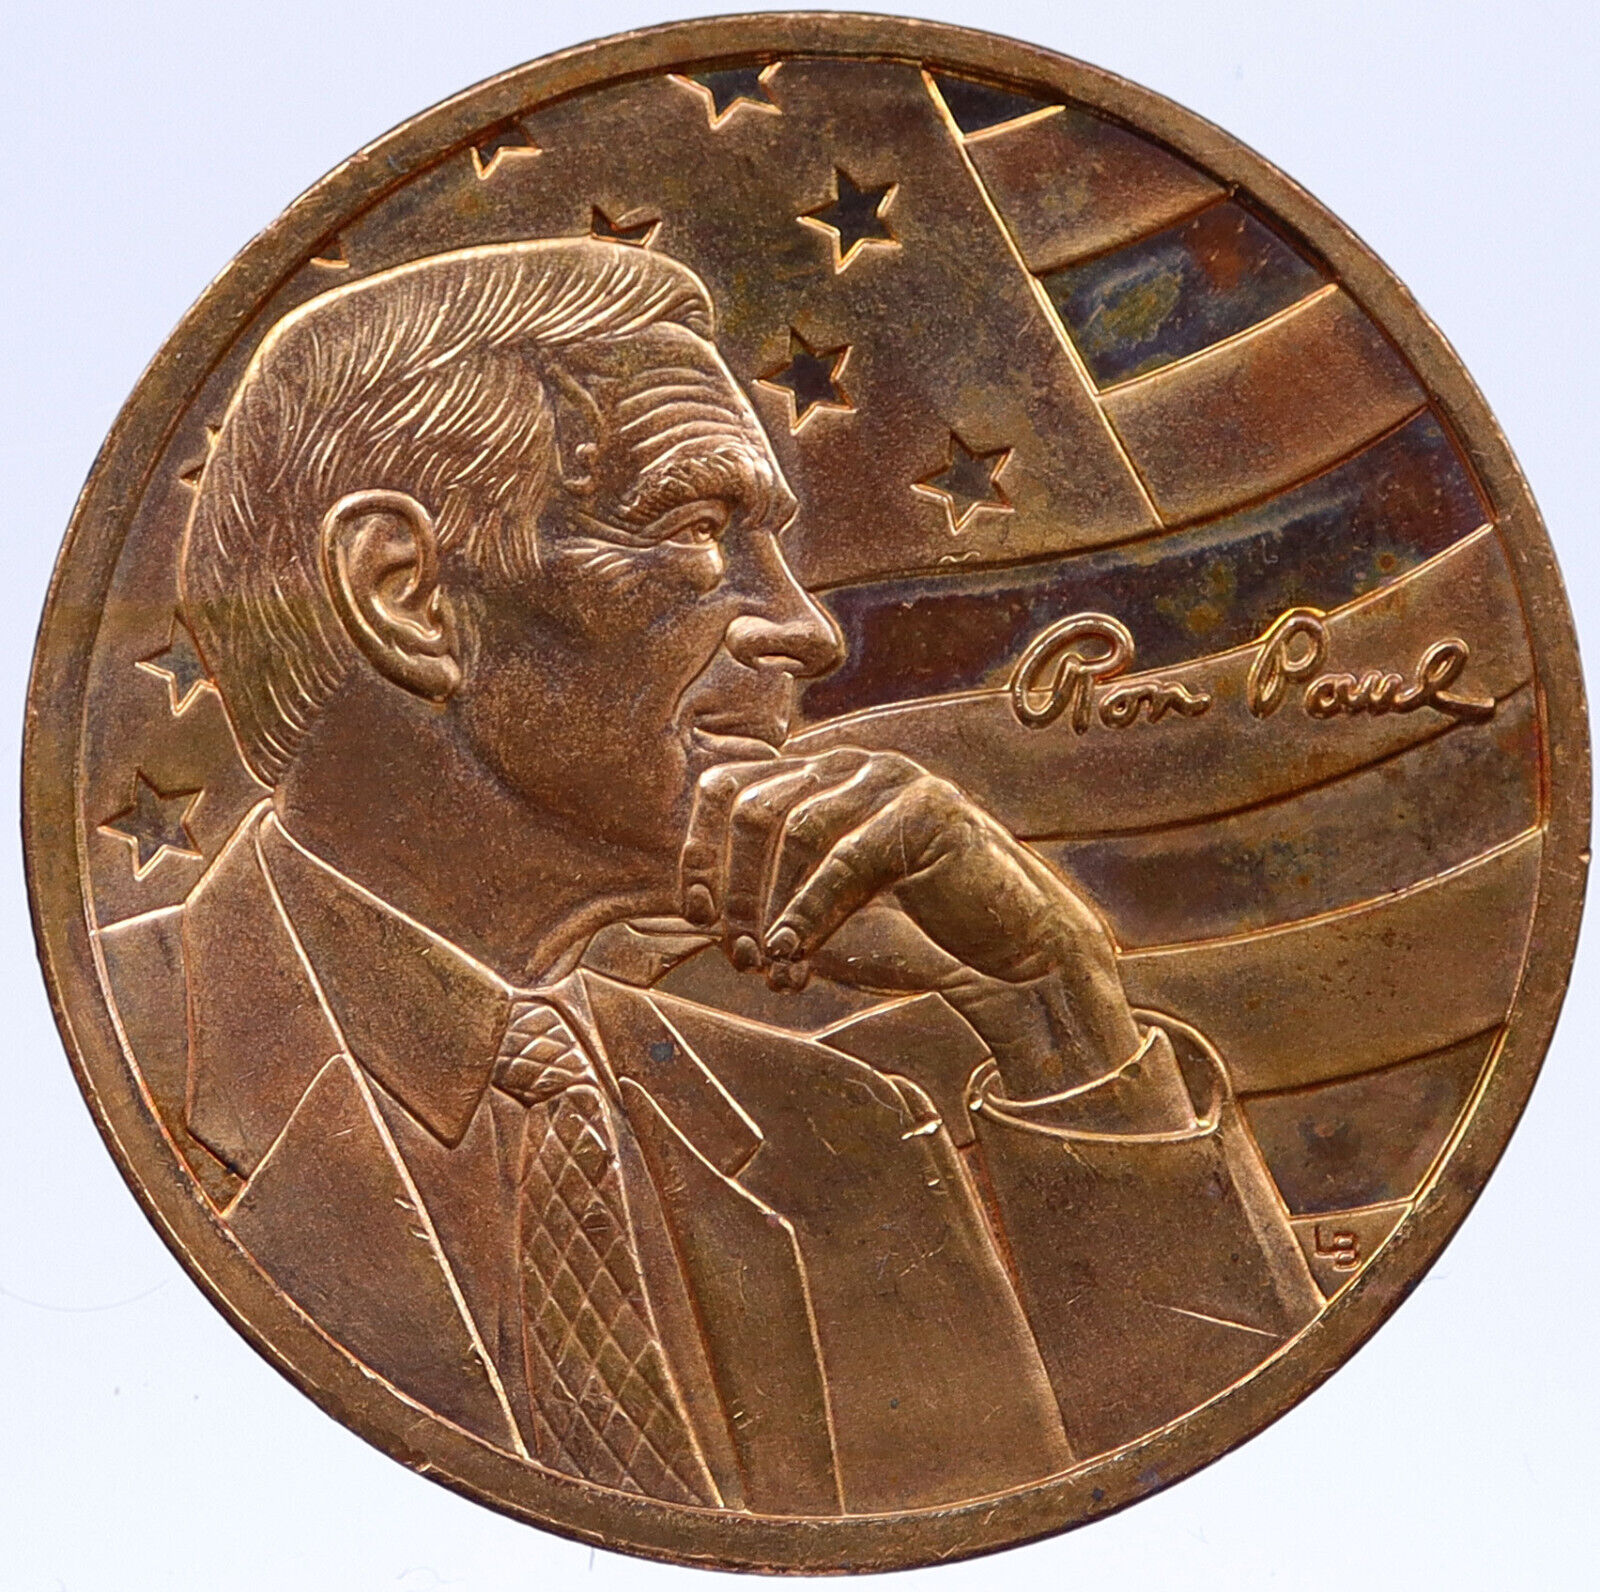 2011 RON PAUL US FLAG Freedom AOCS Copper Round / Medallion NOT Coin i118912